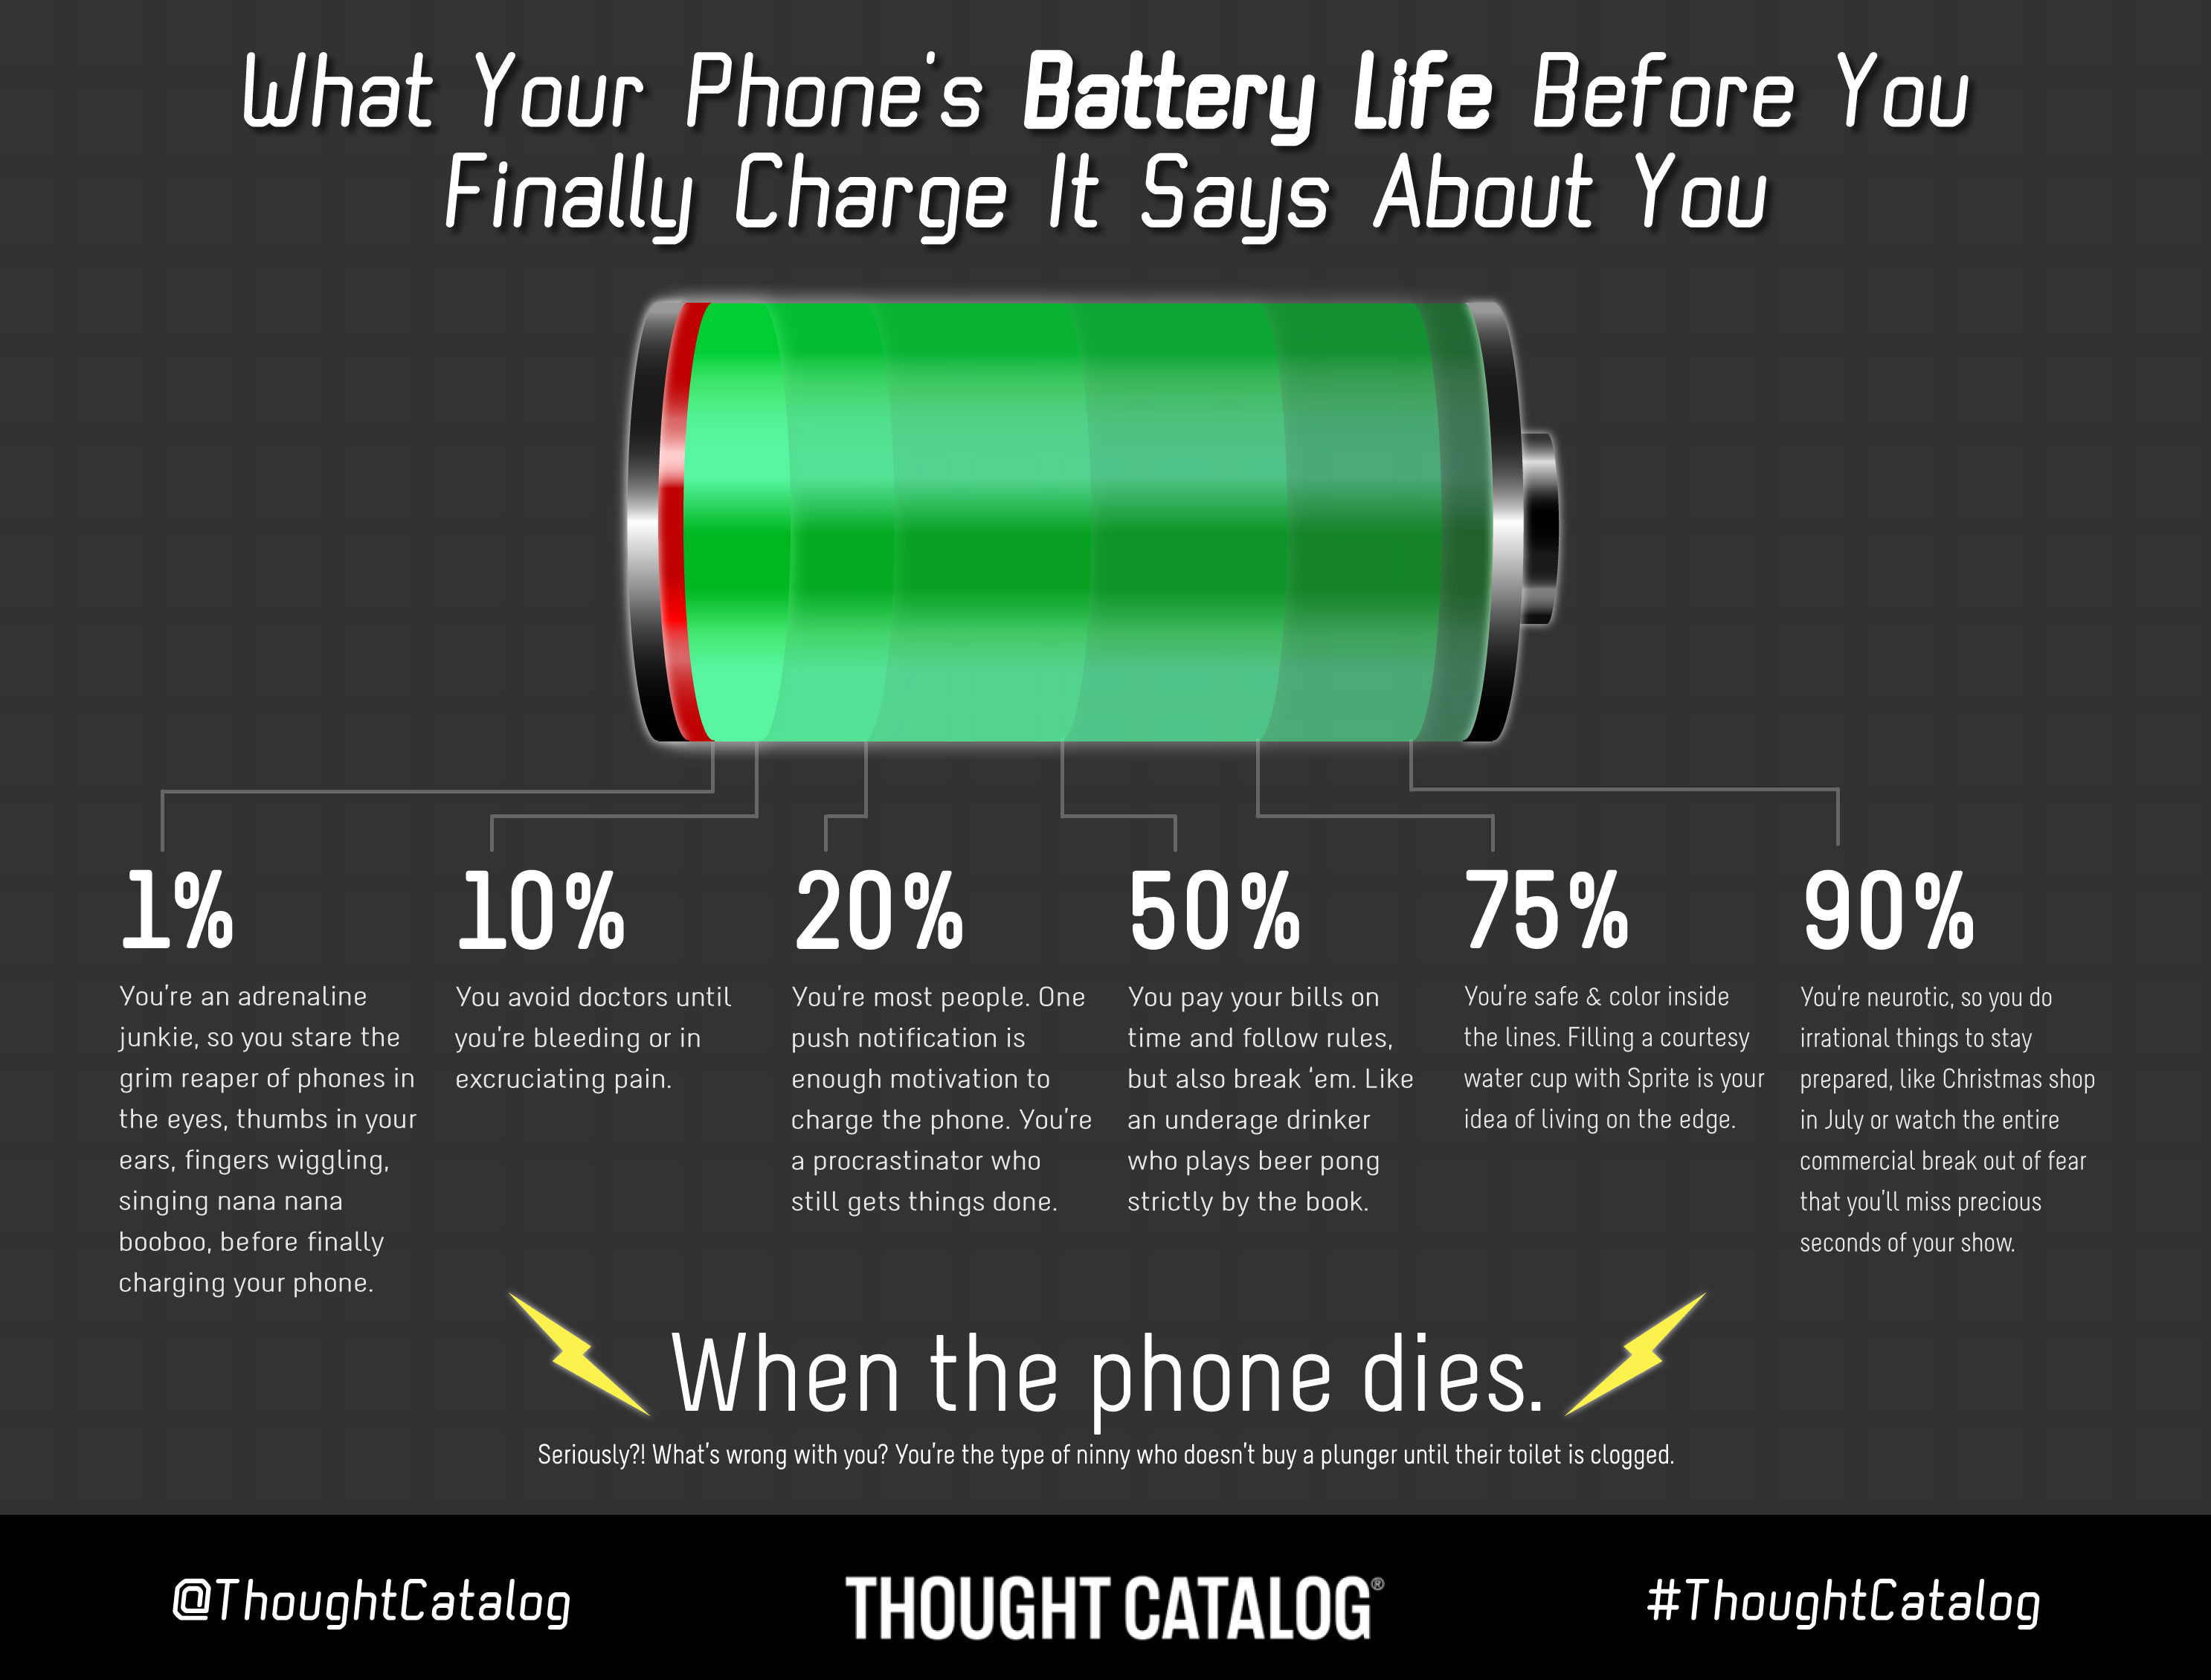 What Your Phone’s Battery Life Before You Finally Charge It Says About